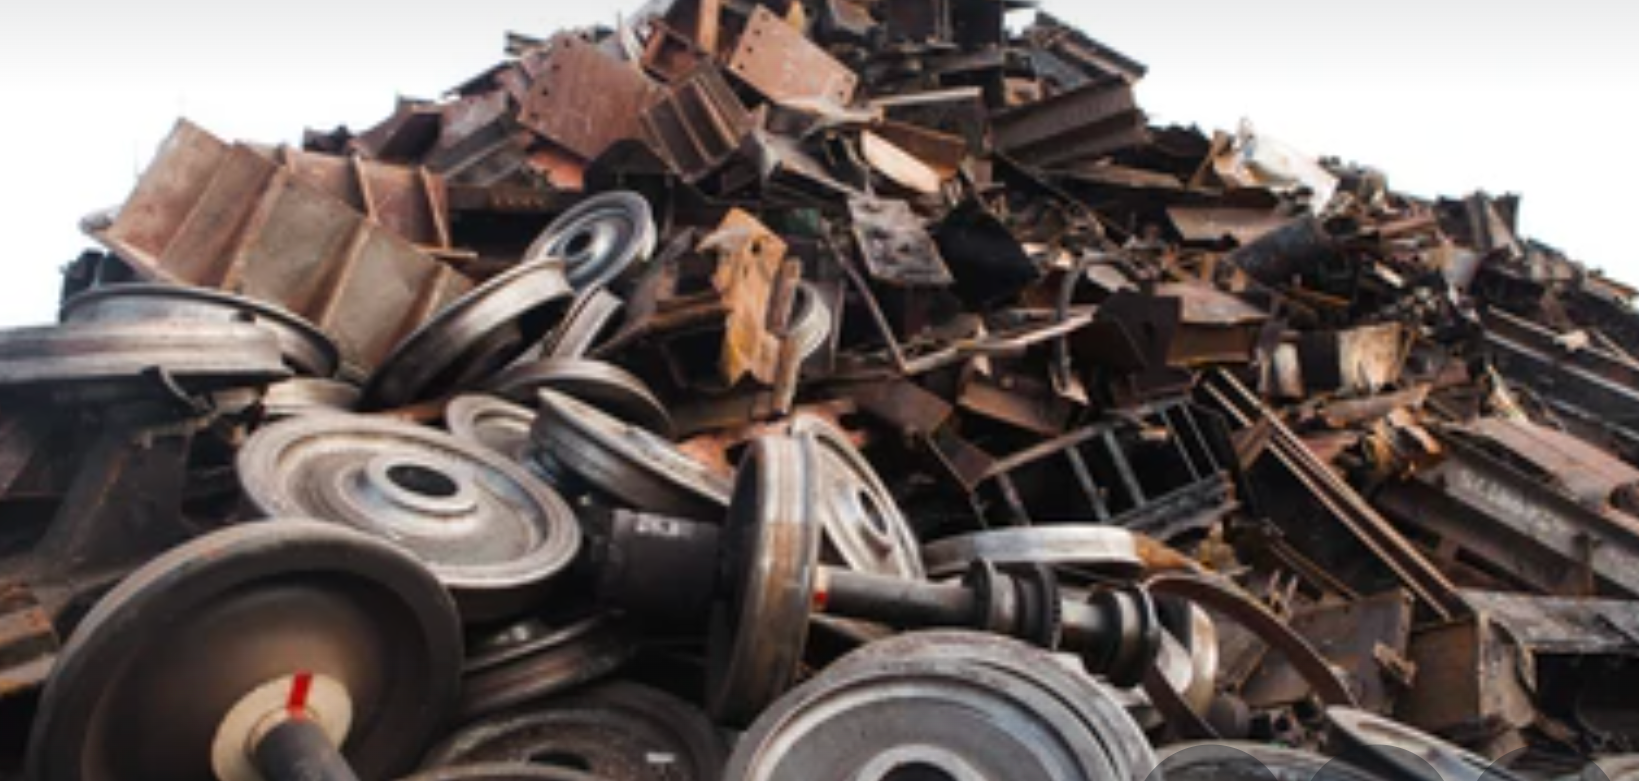 Types of Metal Scrap and Cutting Method